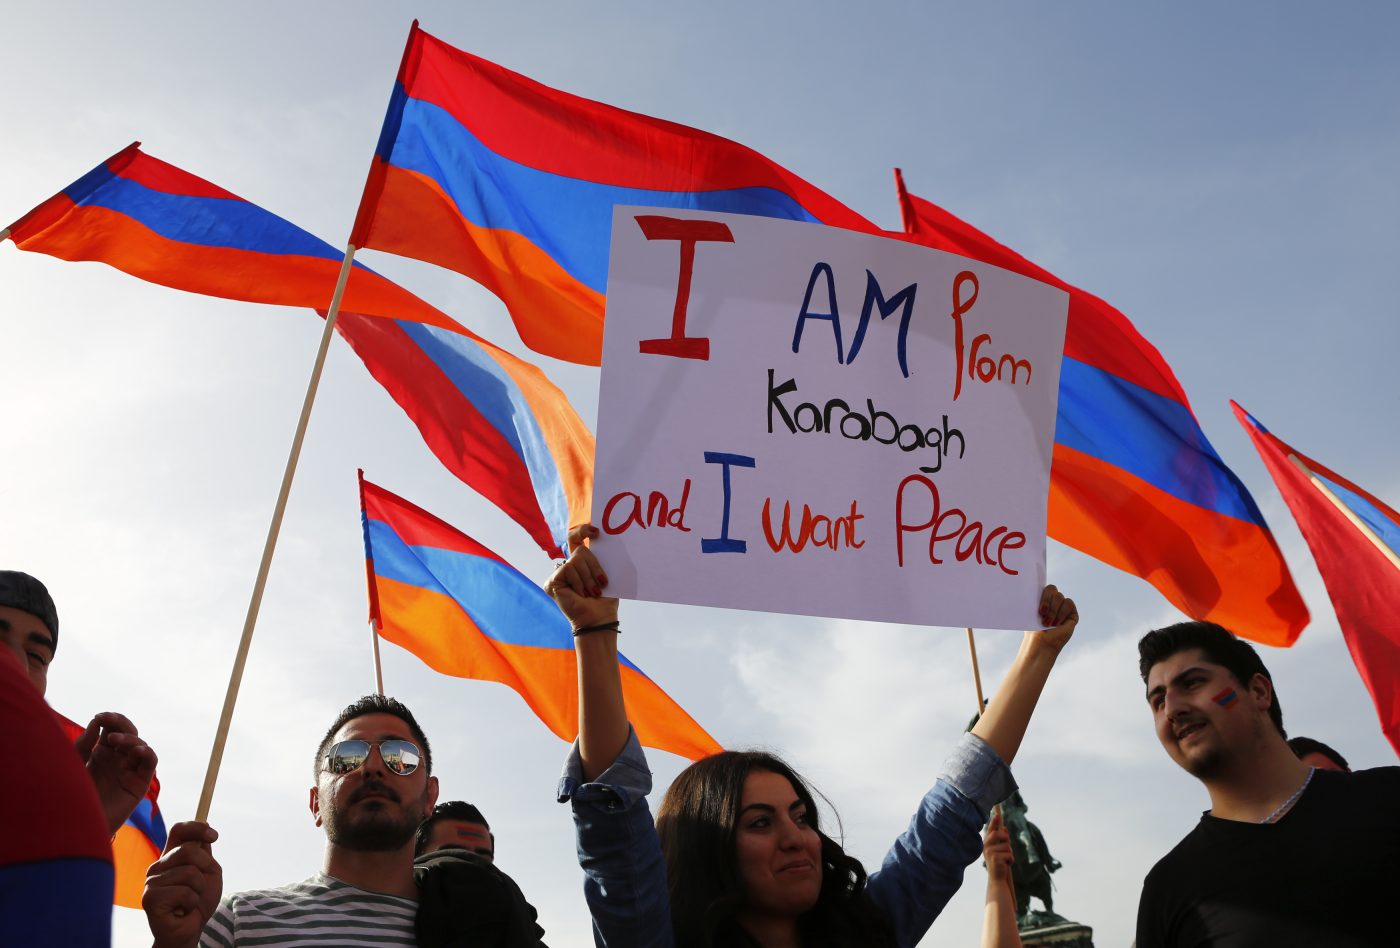 Photo: People take part in a rally for peace in Nagorno-Karabakh, in Vienna, Austria, April 5, 2016. Credit: REUTERS/Leonhard Foeger